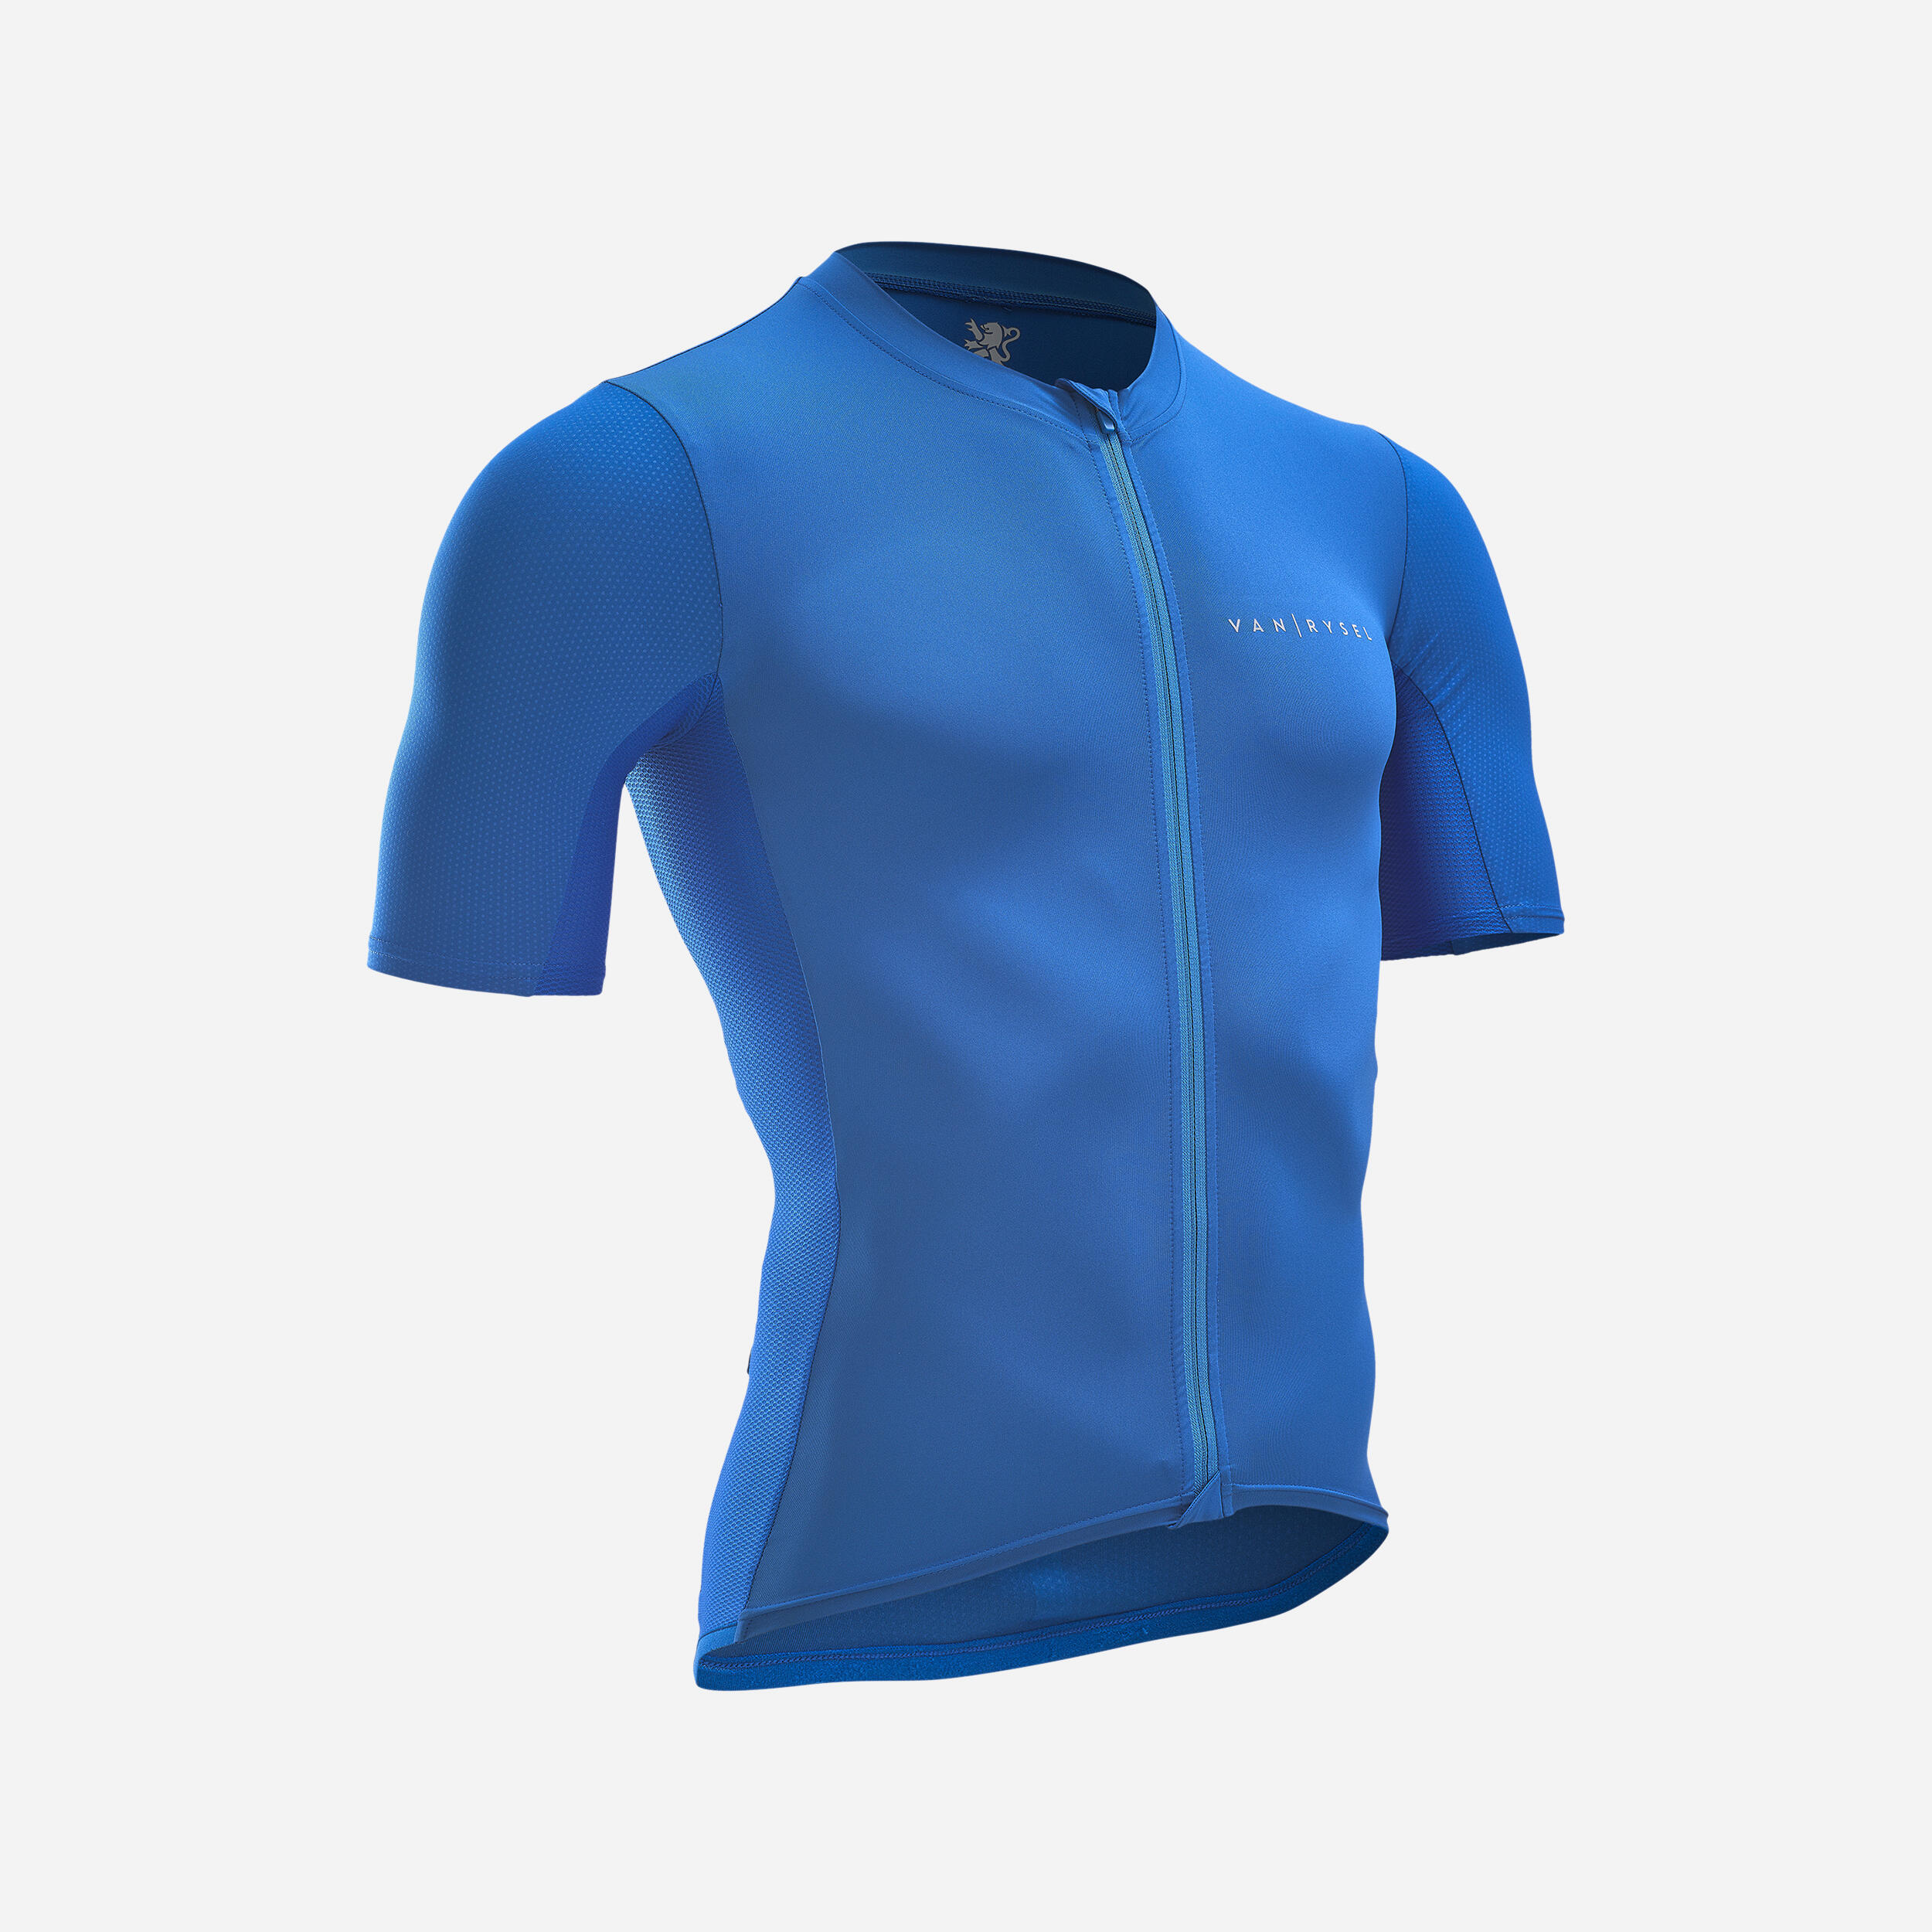 VAN RYSEL Men's Short-Sleeved Road Cycling Summer Jersey Neo Racer - Electric Blue